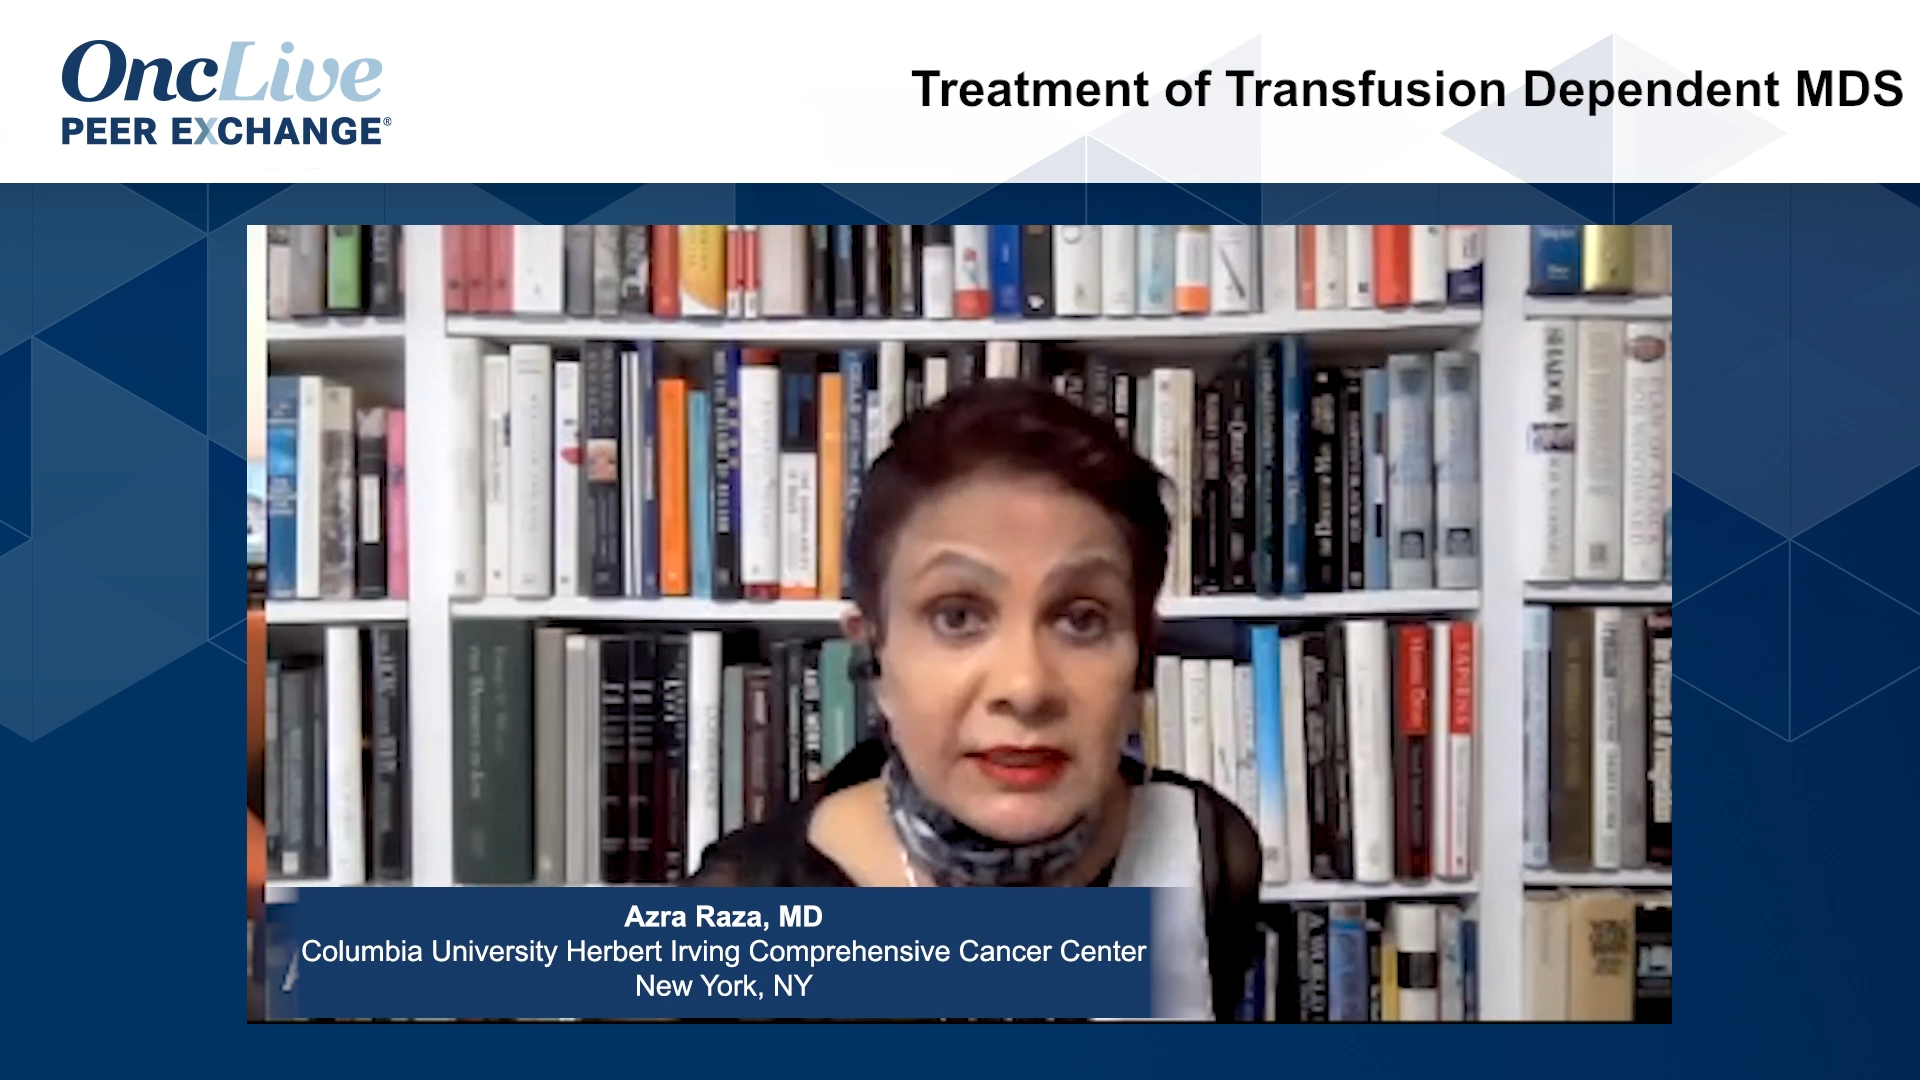 Treatment of Transfusion Dependent MDS